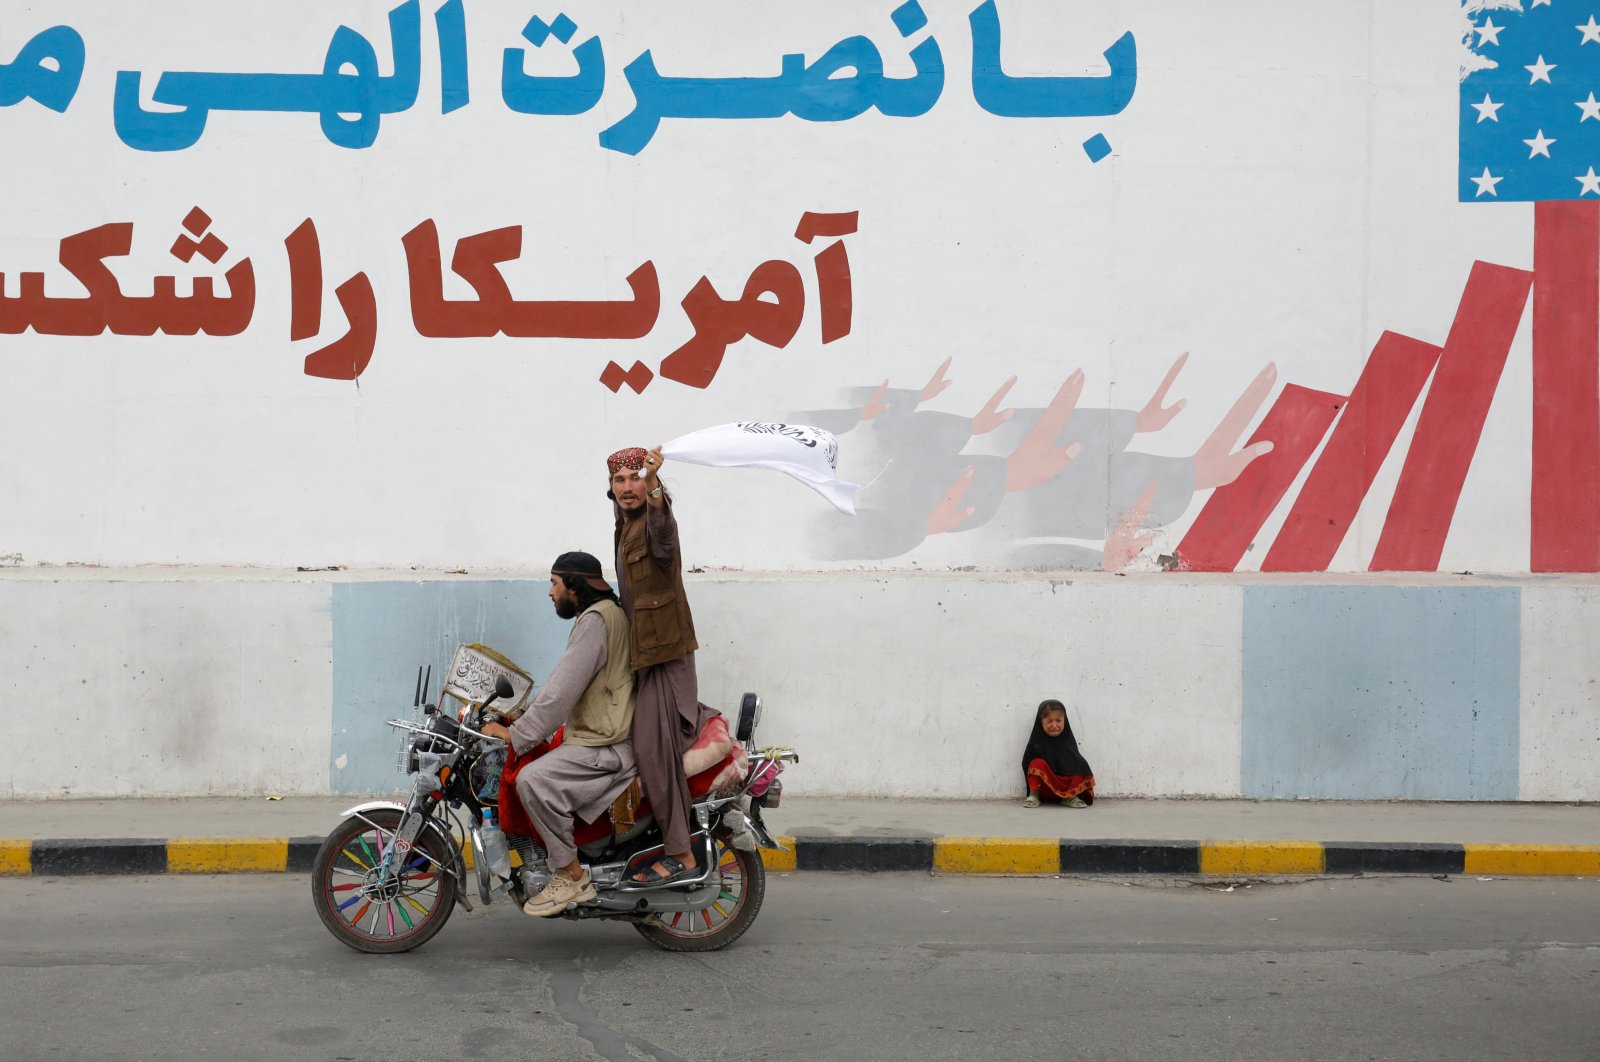 A Taliban supporter holds an Islamic Emirate of Afghanistan flag on the first anniversary of the fall of Kabul on a street in Kabul, Afghanistan, Aug. 15, 2022. (Reuters Photo)